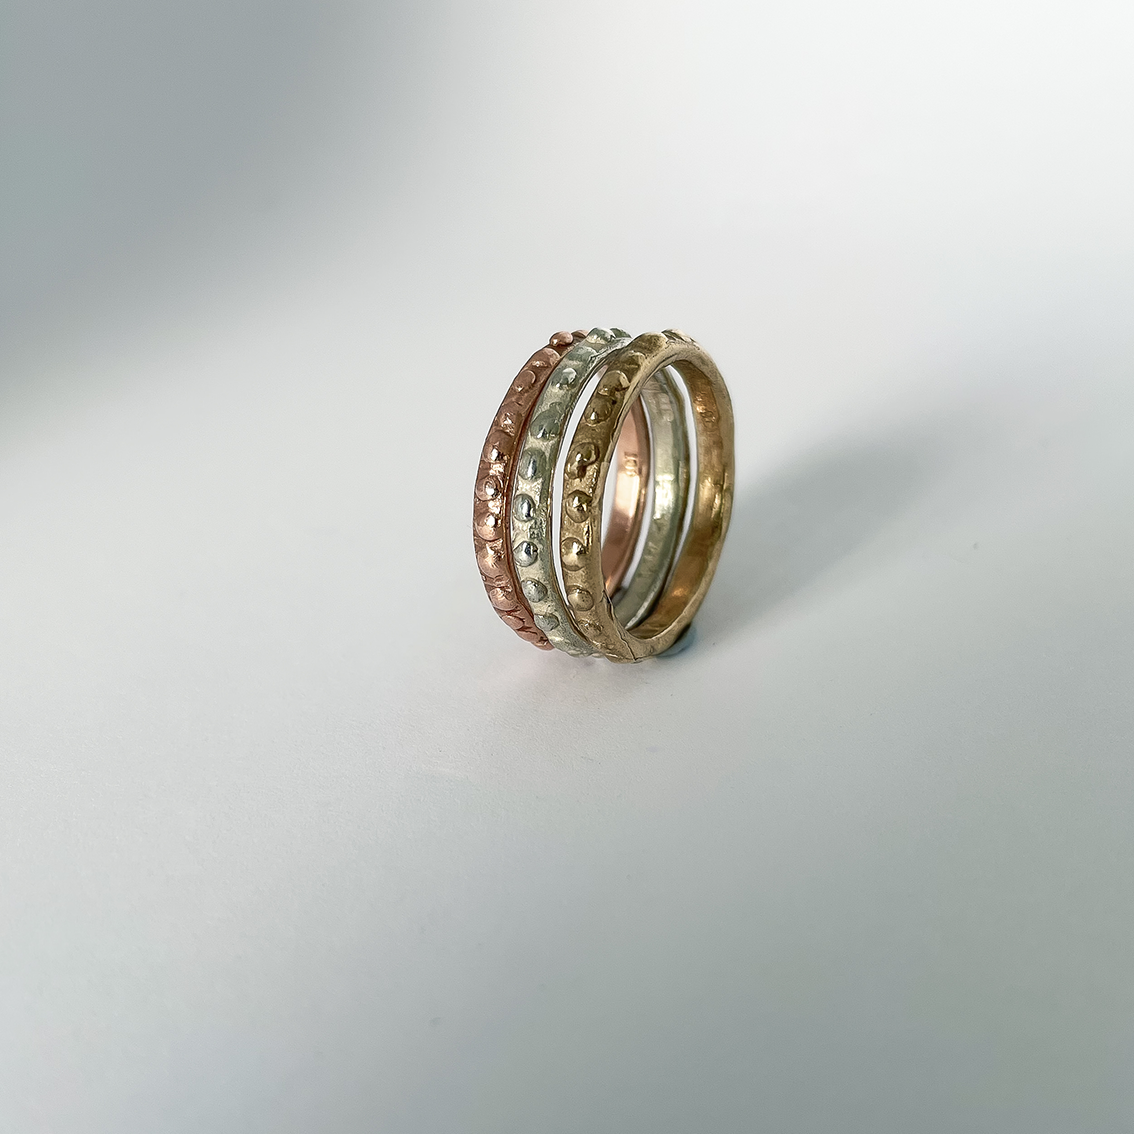 Organic Stacking Rings in Rose Gold, Yellow Gold and Sterling Silver